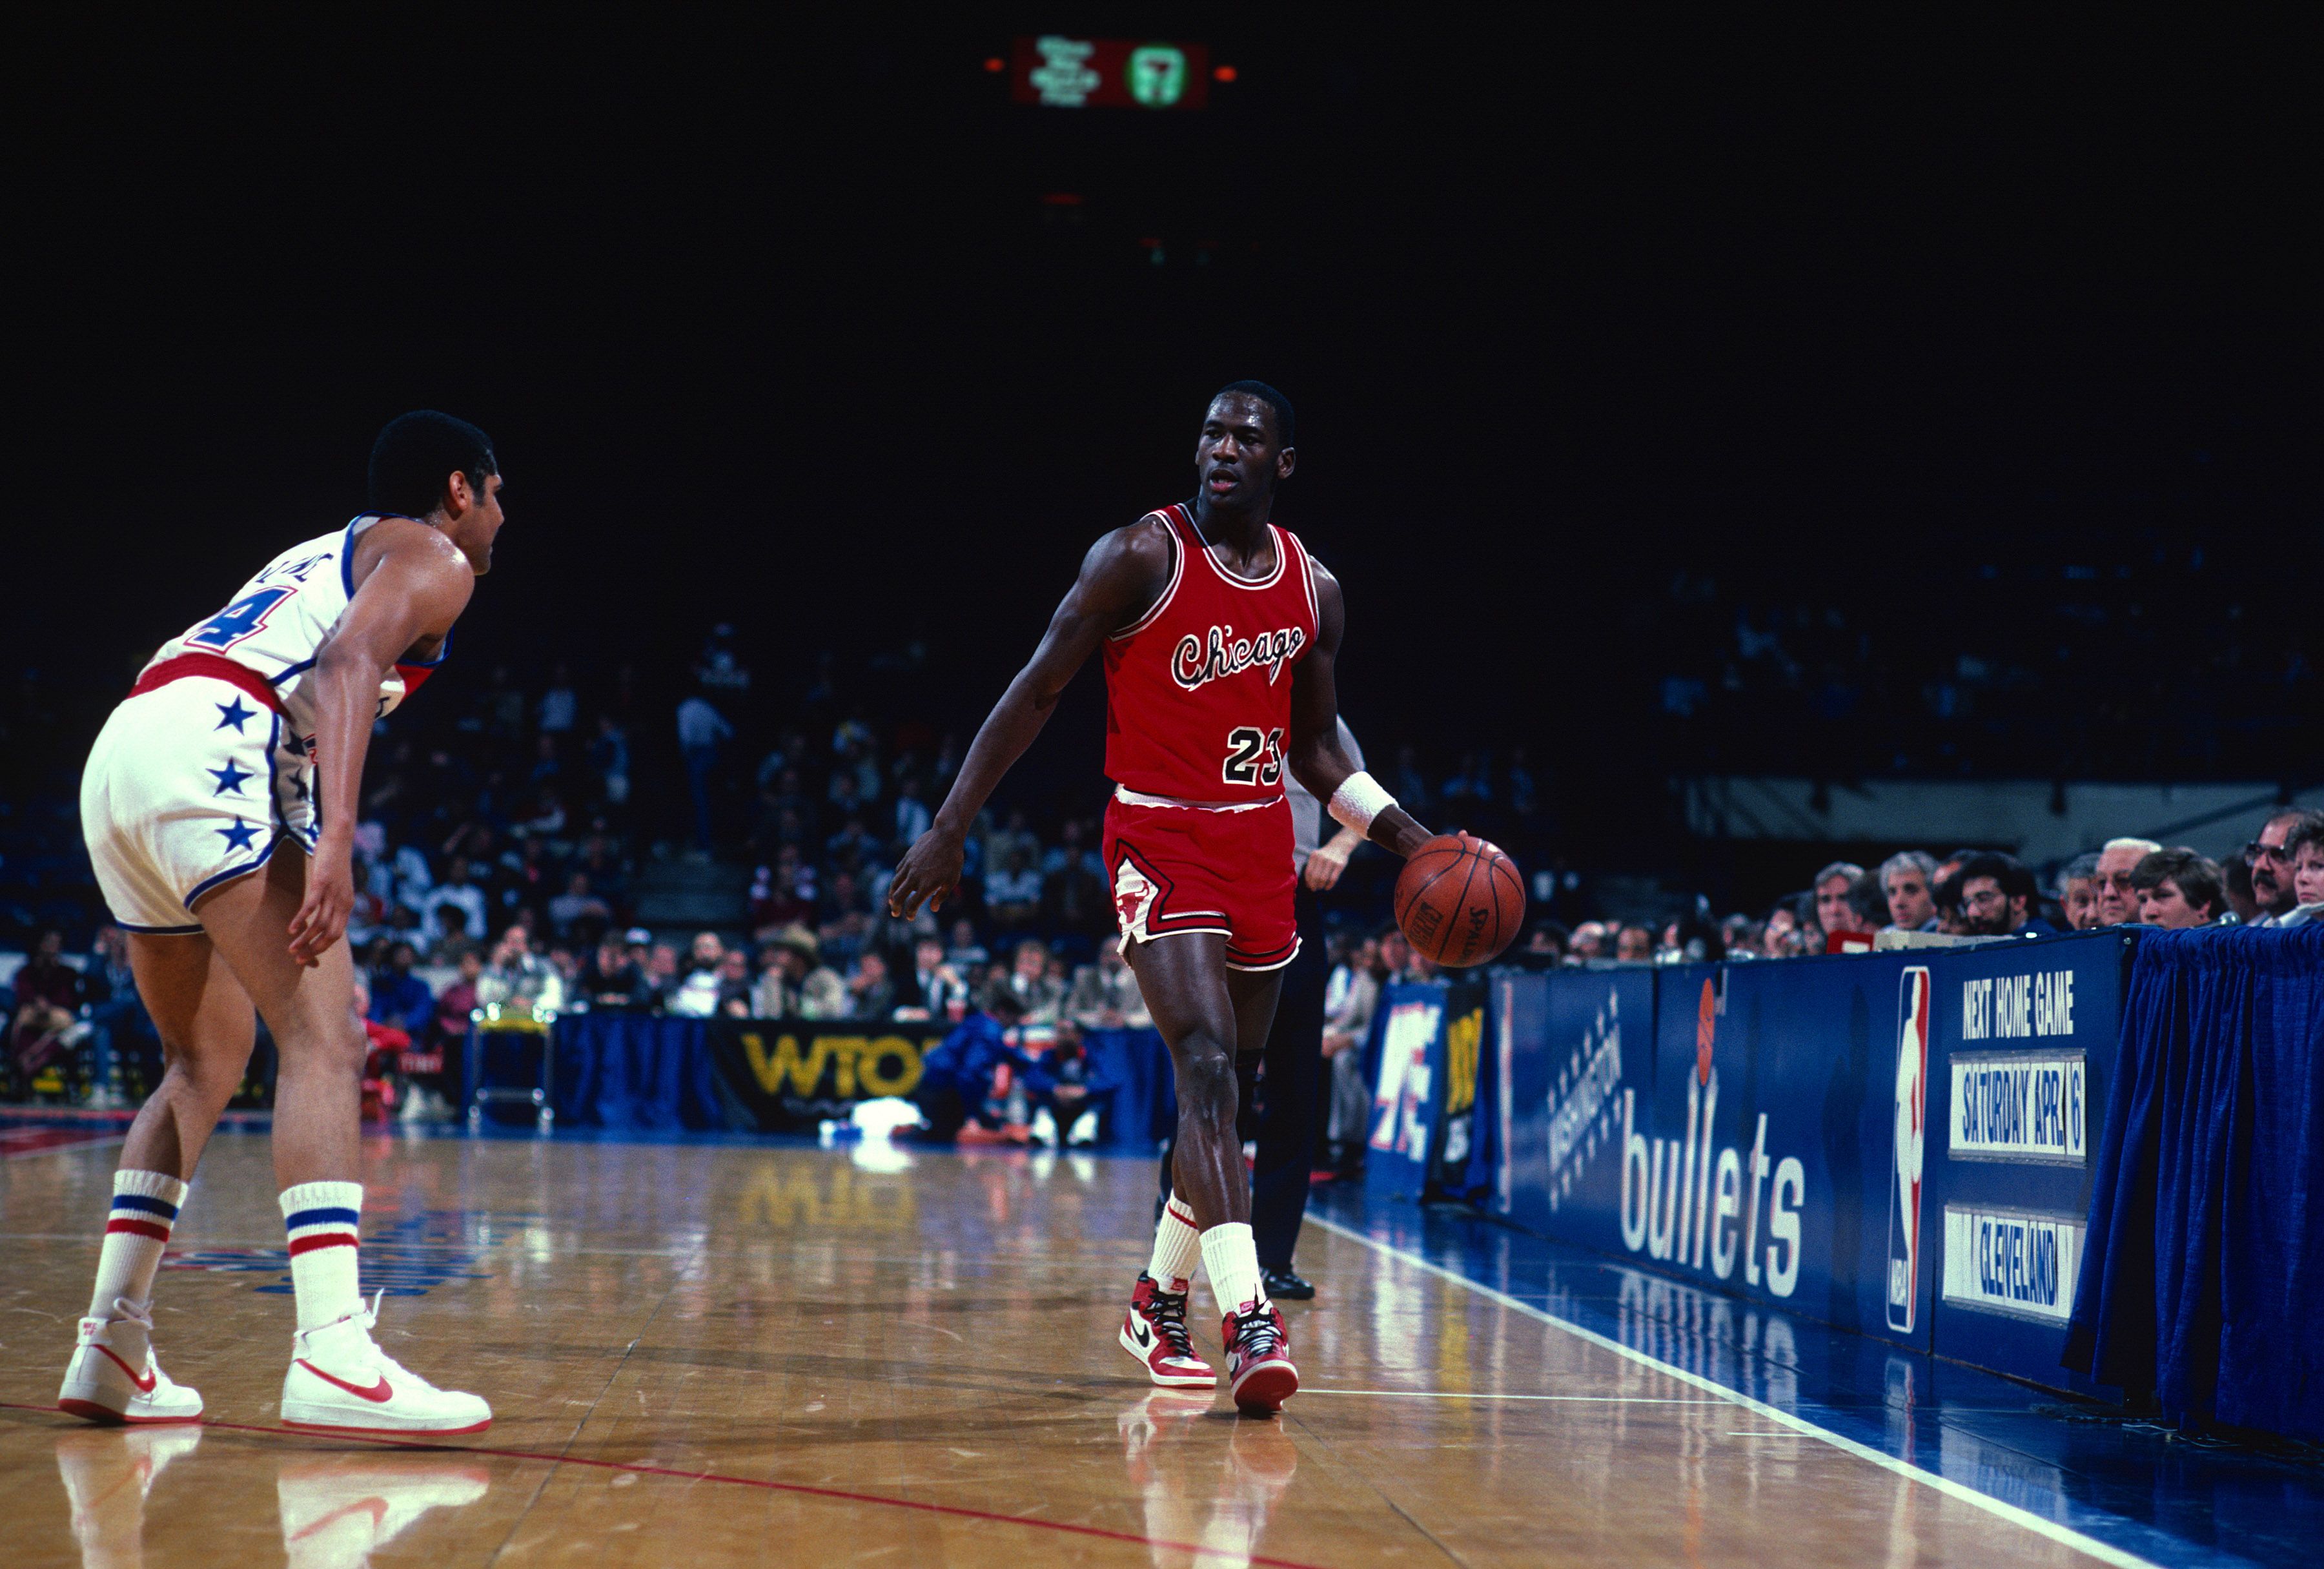 Sneakers from Michael Jordan's rookie season up for sale at Sotheby's